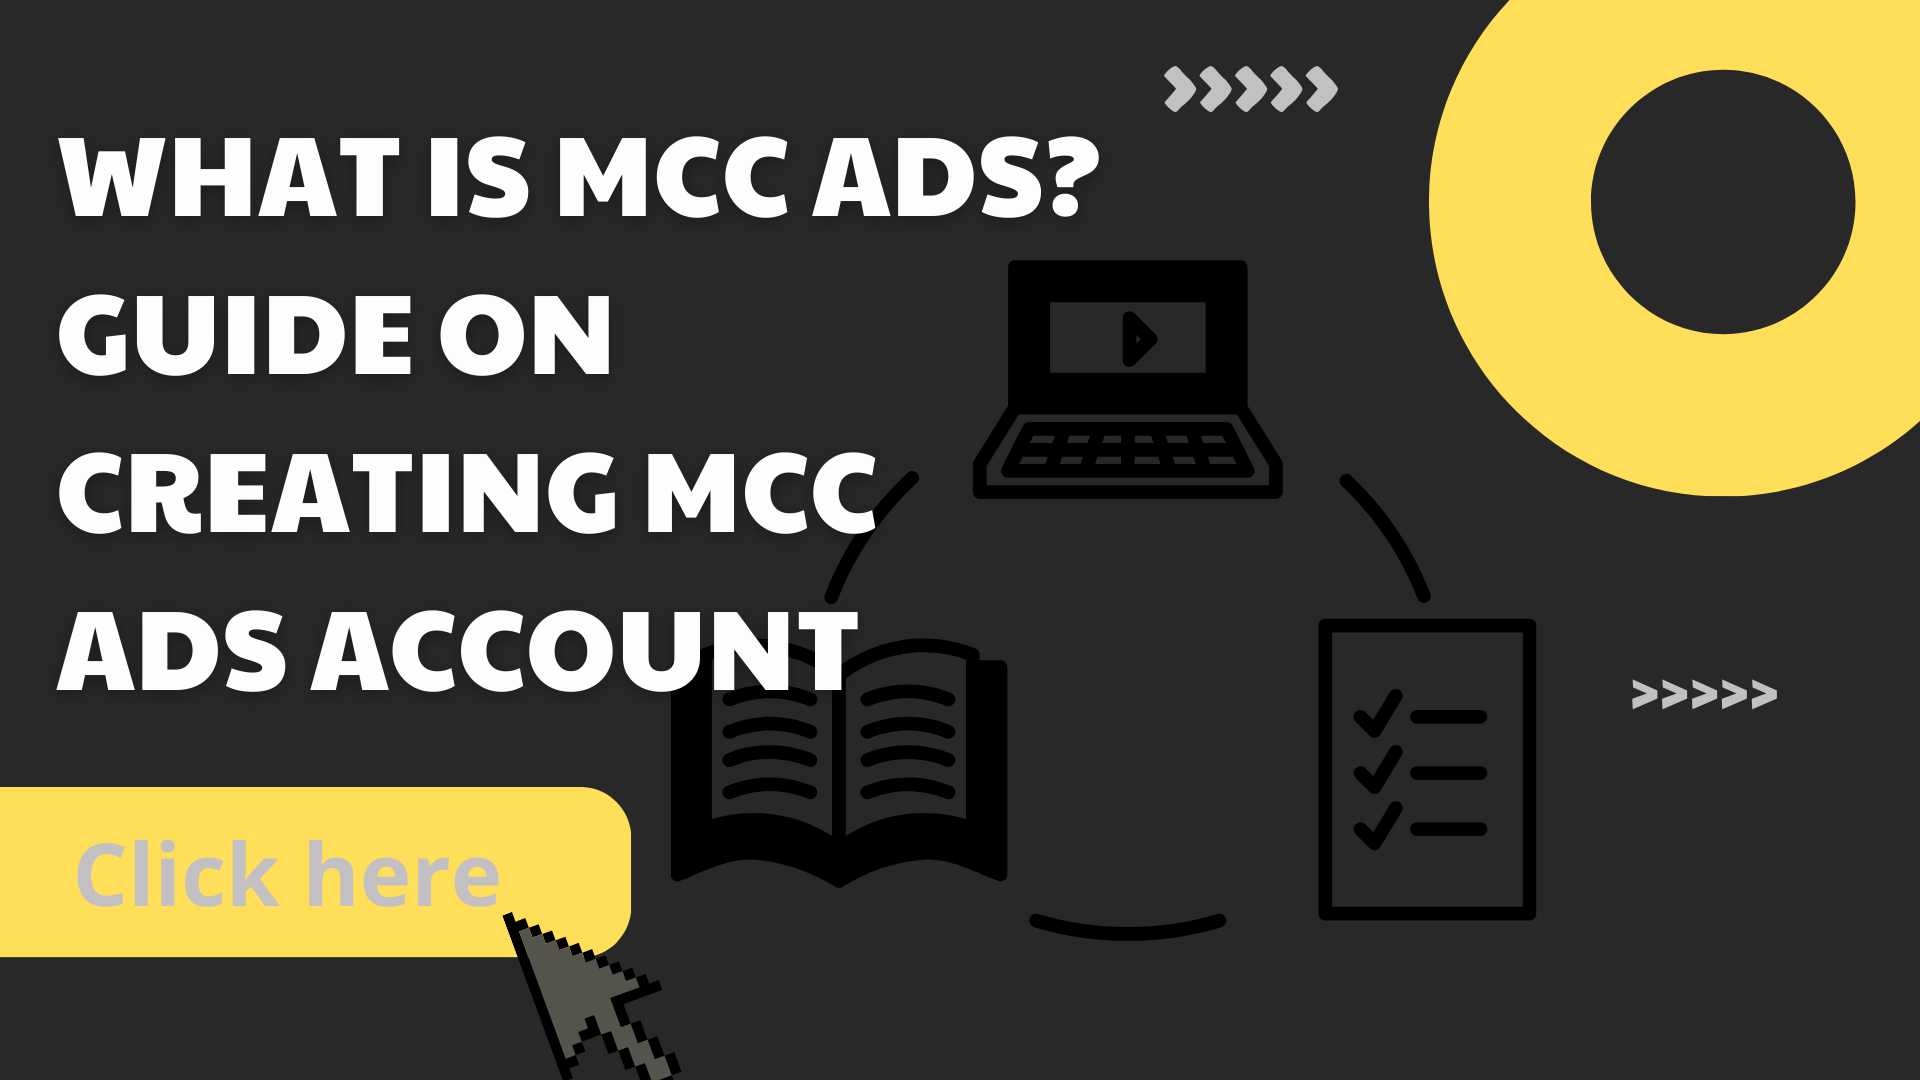 What is MCC Ads? Guide on Creating MCC Ads Account